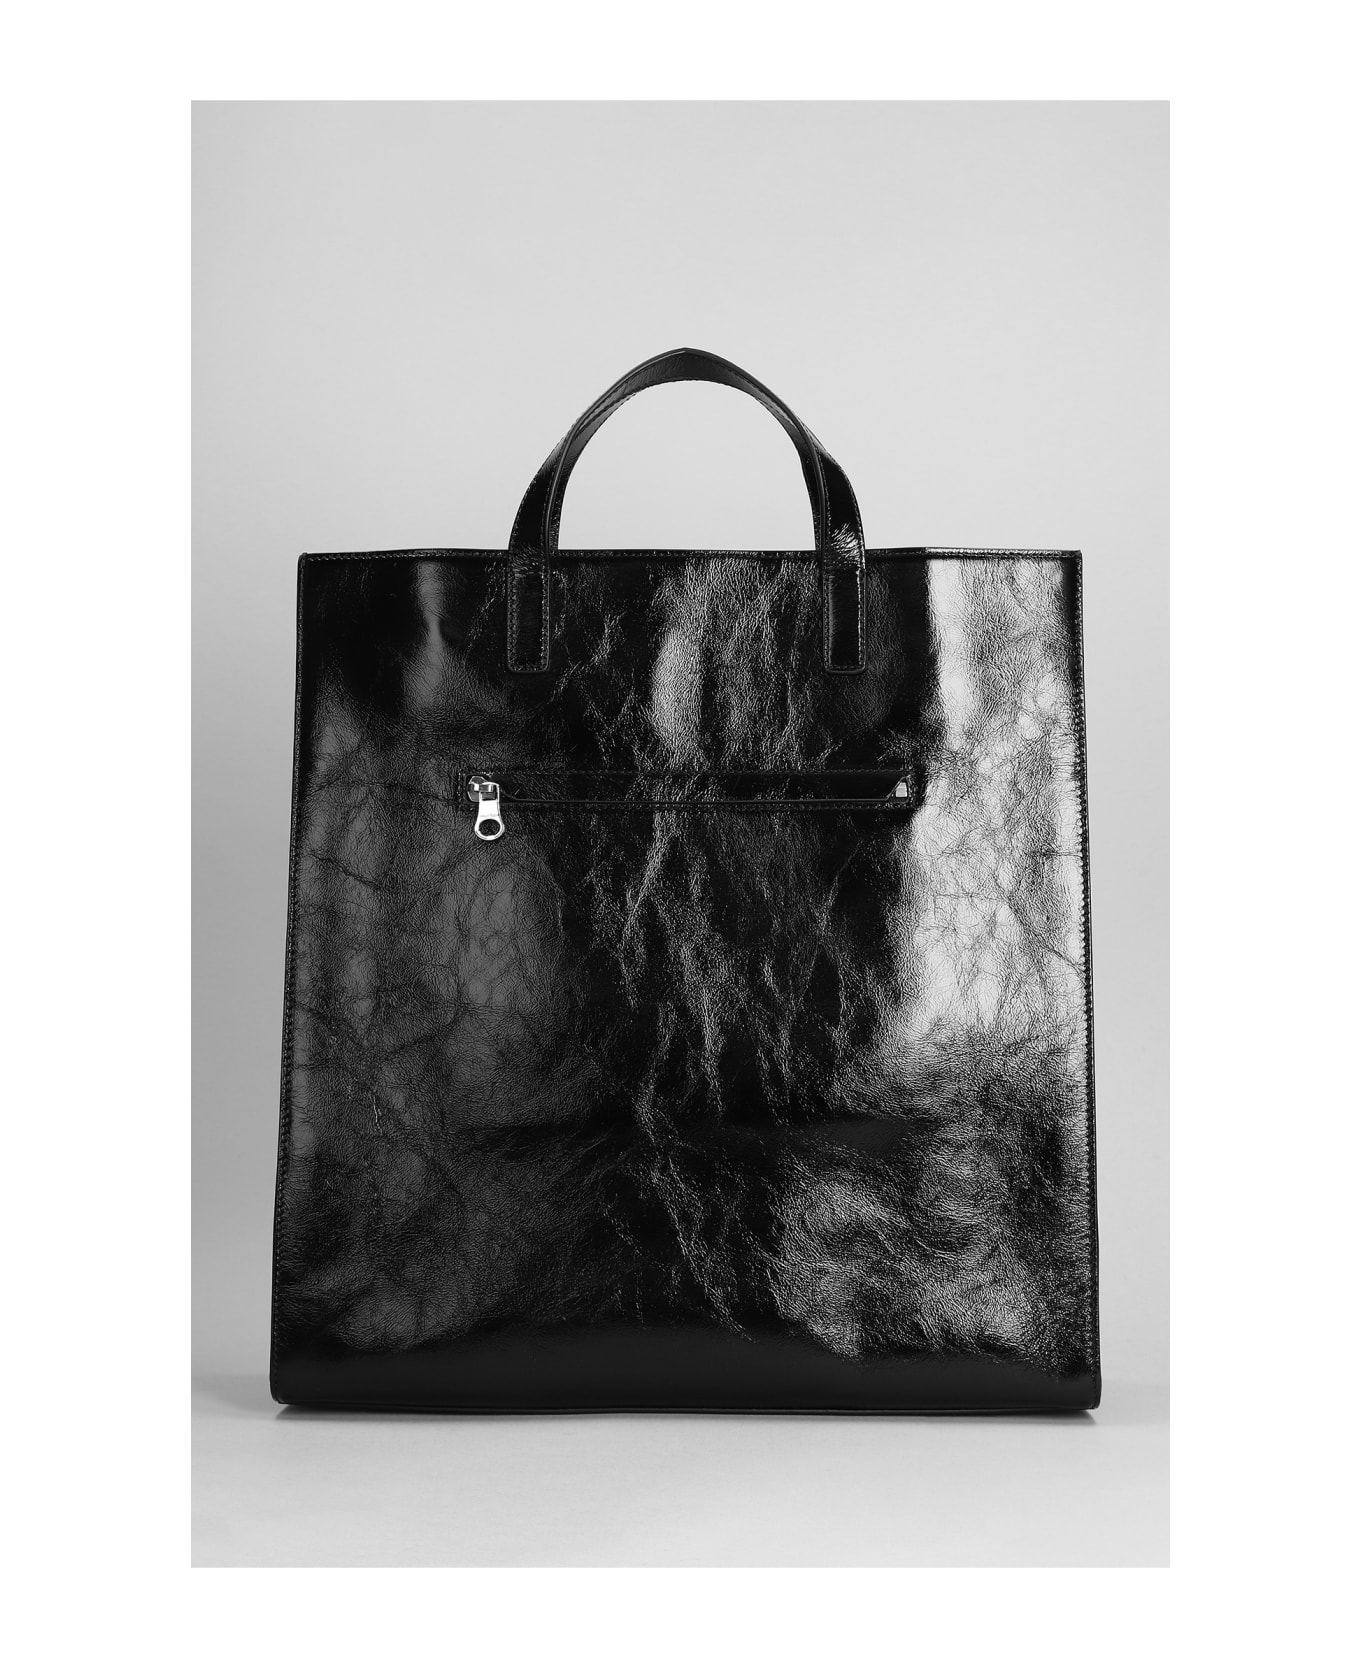 Courrèges Tote In Black Patent Leather - black トートバッグ